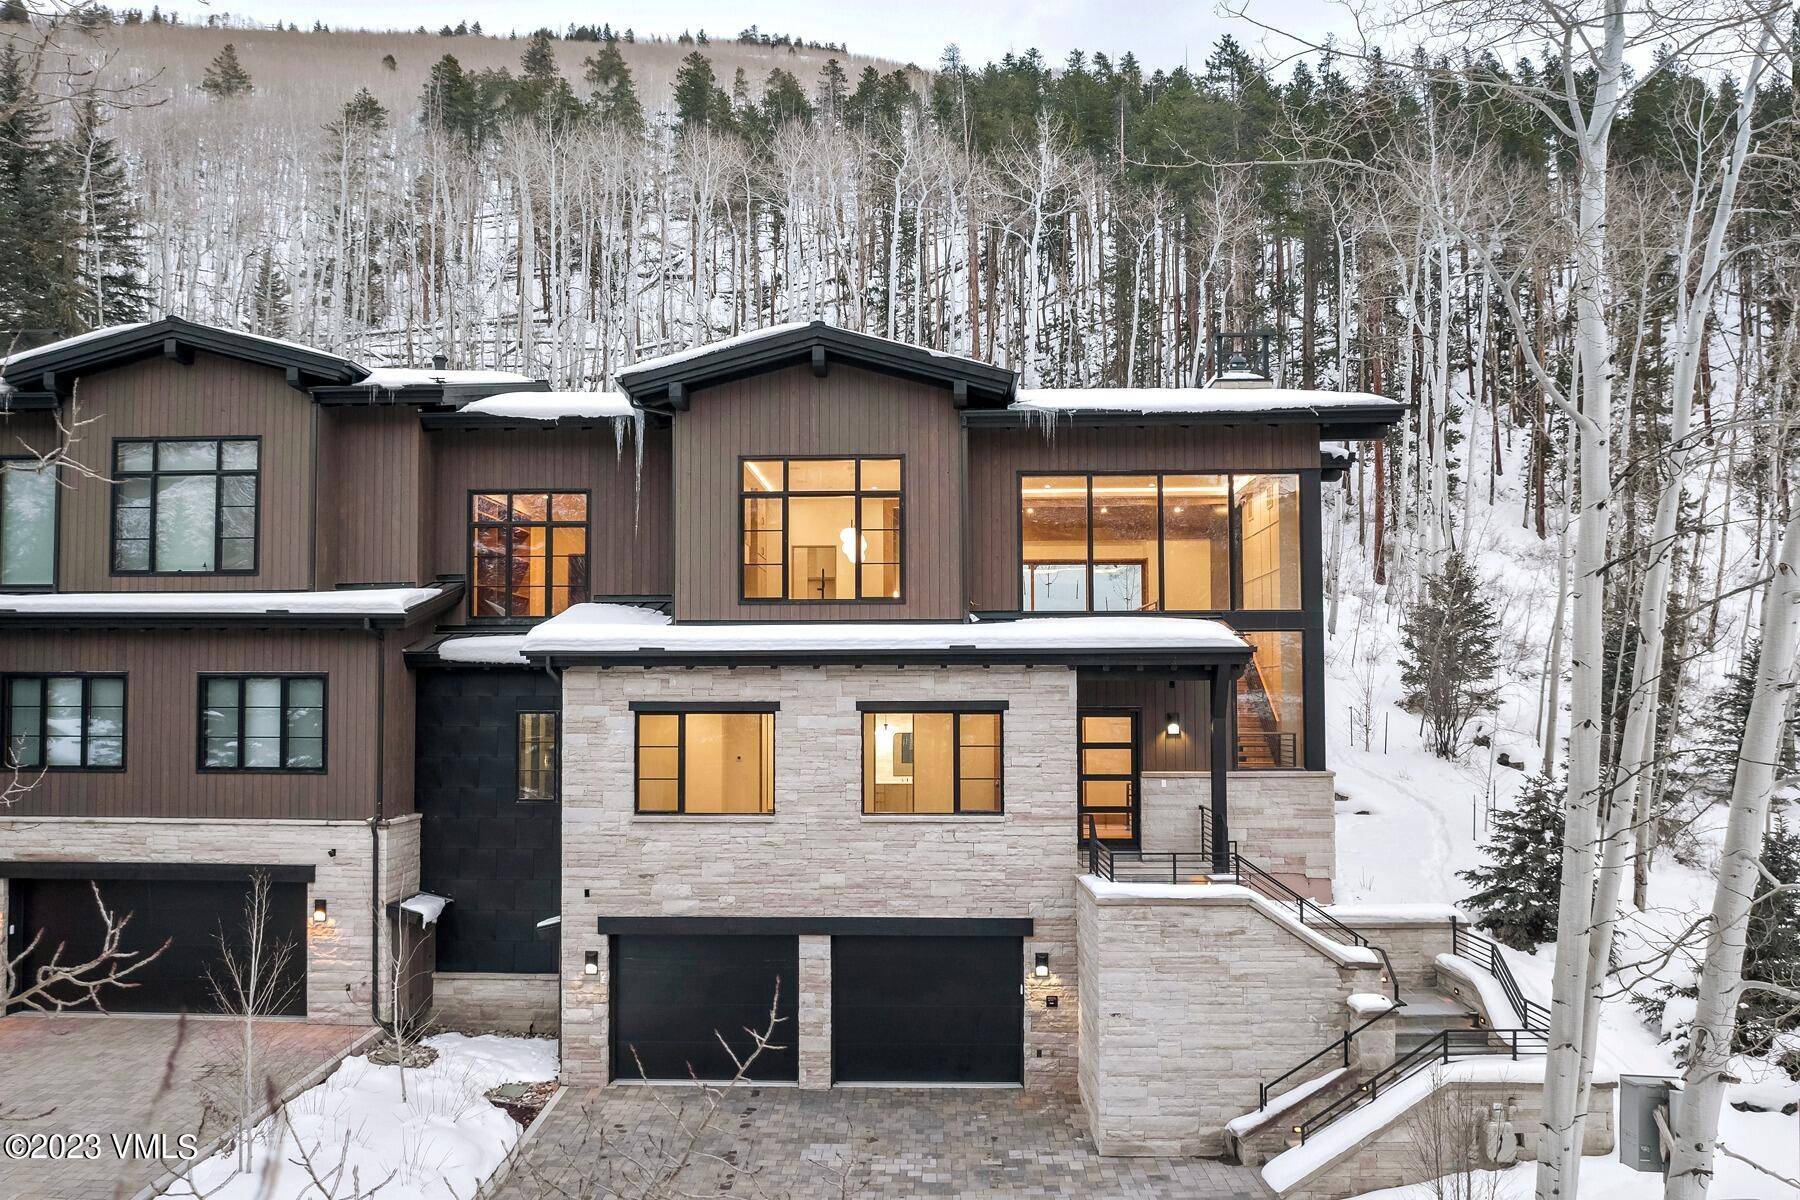 Rare opportunity to purchase high end luxury new construction on a coveted lot in Glen Lyon, just a few parcels removed from the Cascade Chairlift on Vail Mountain.